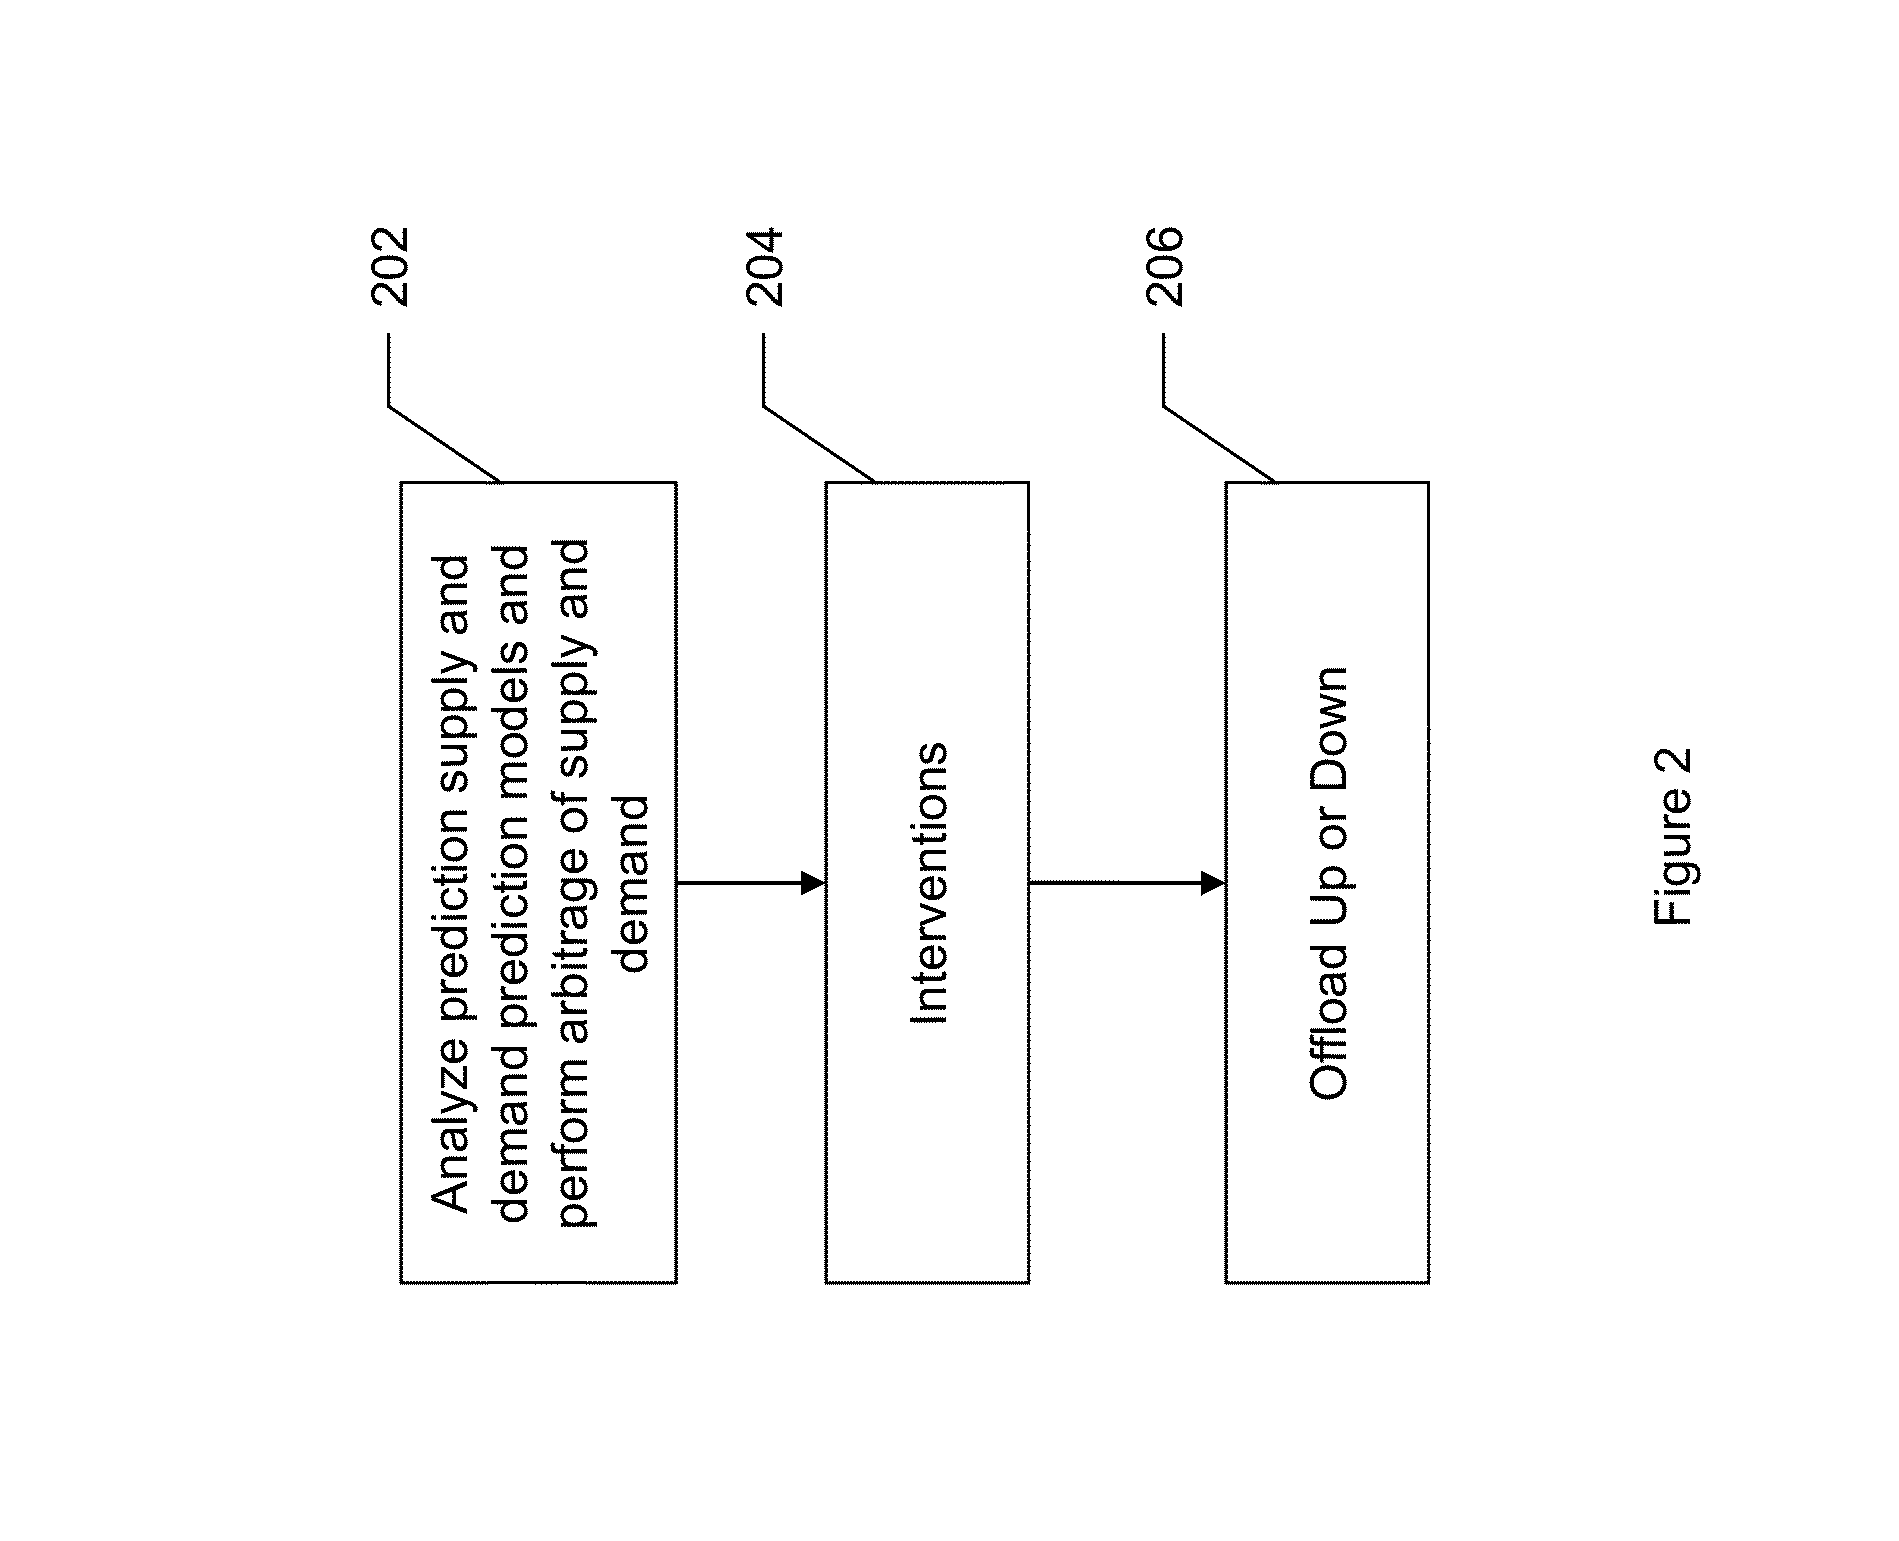 System and method for efficient provision of healthcare